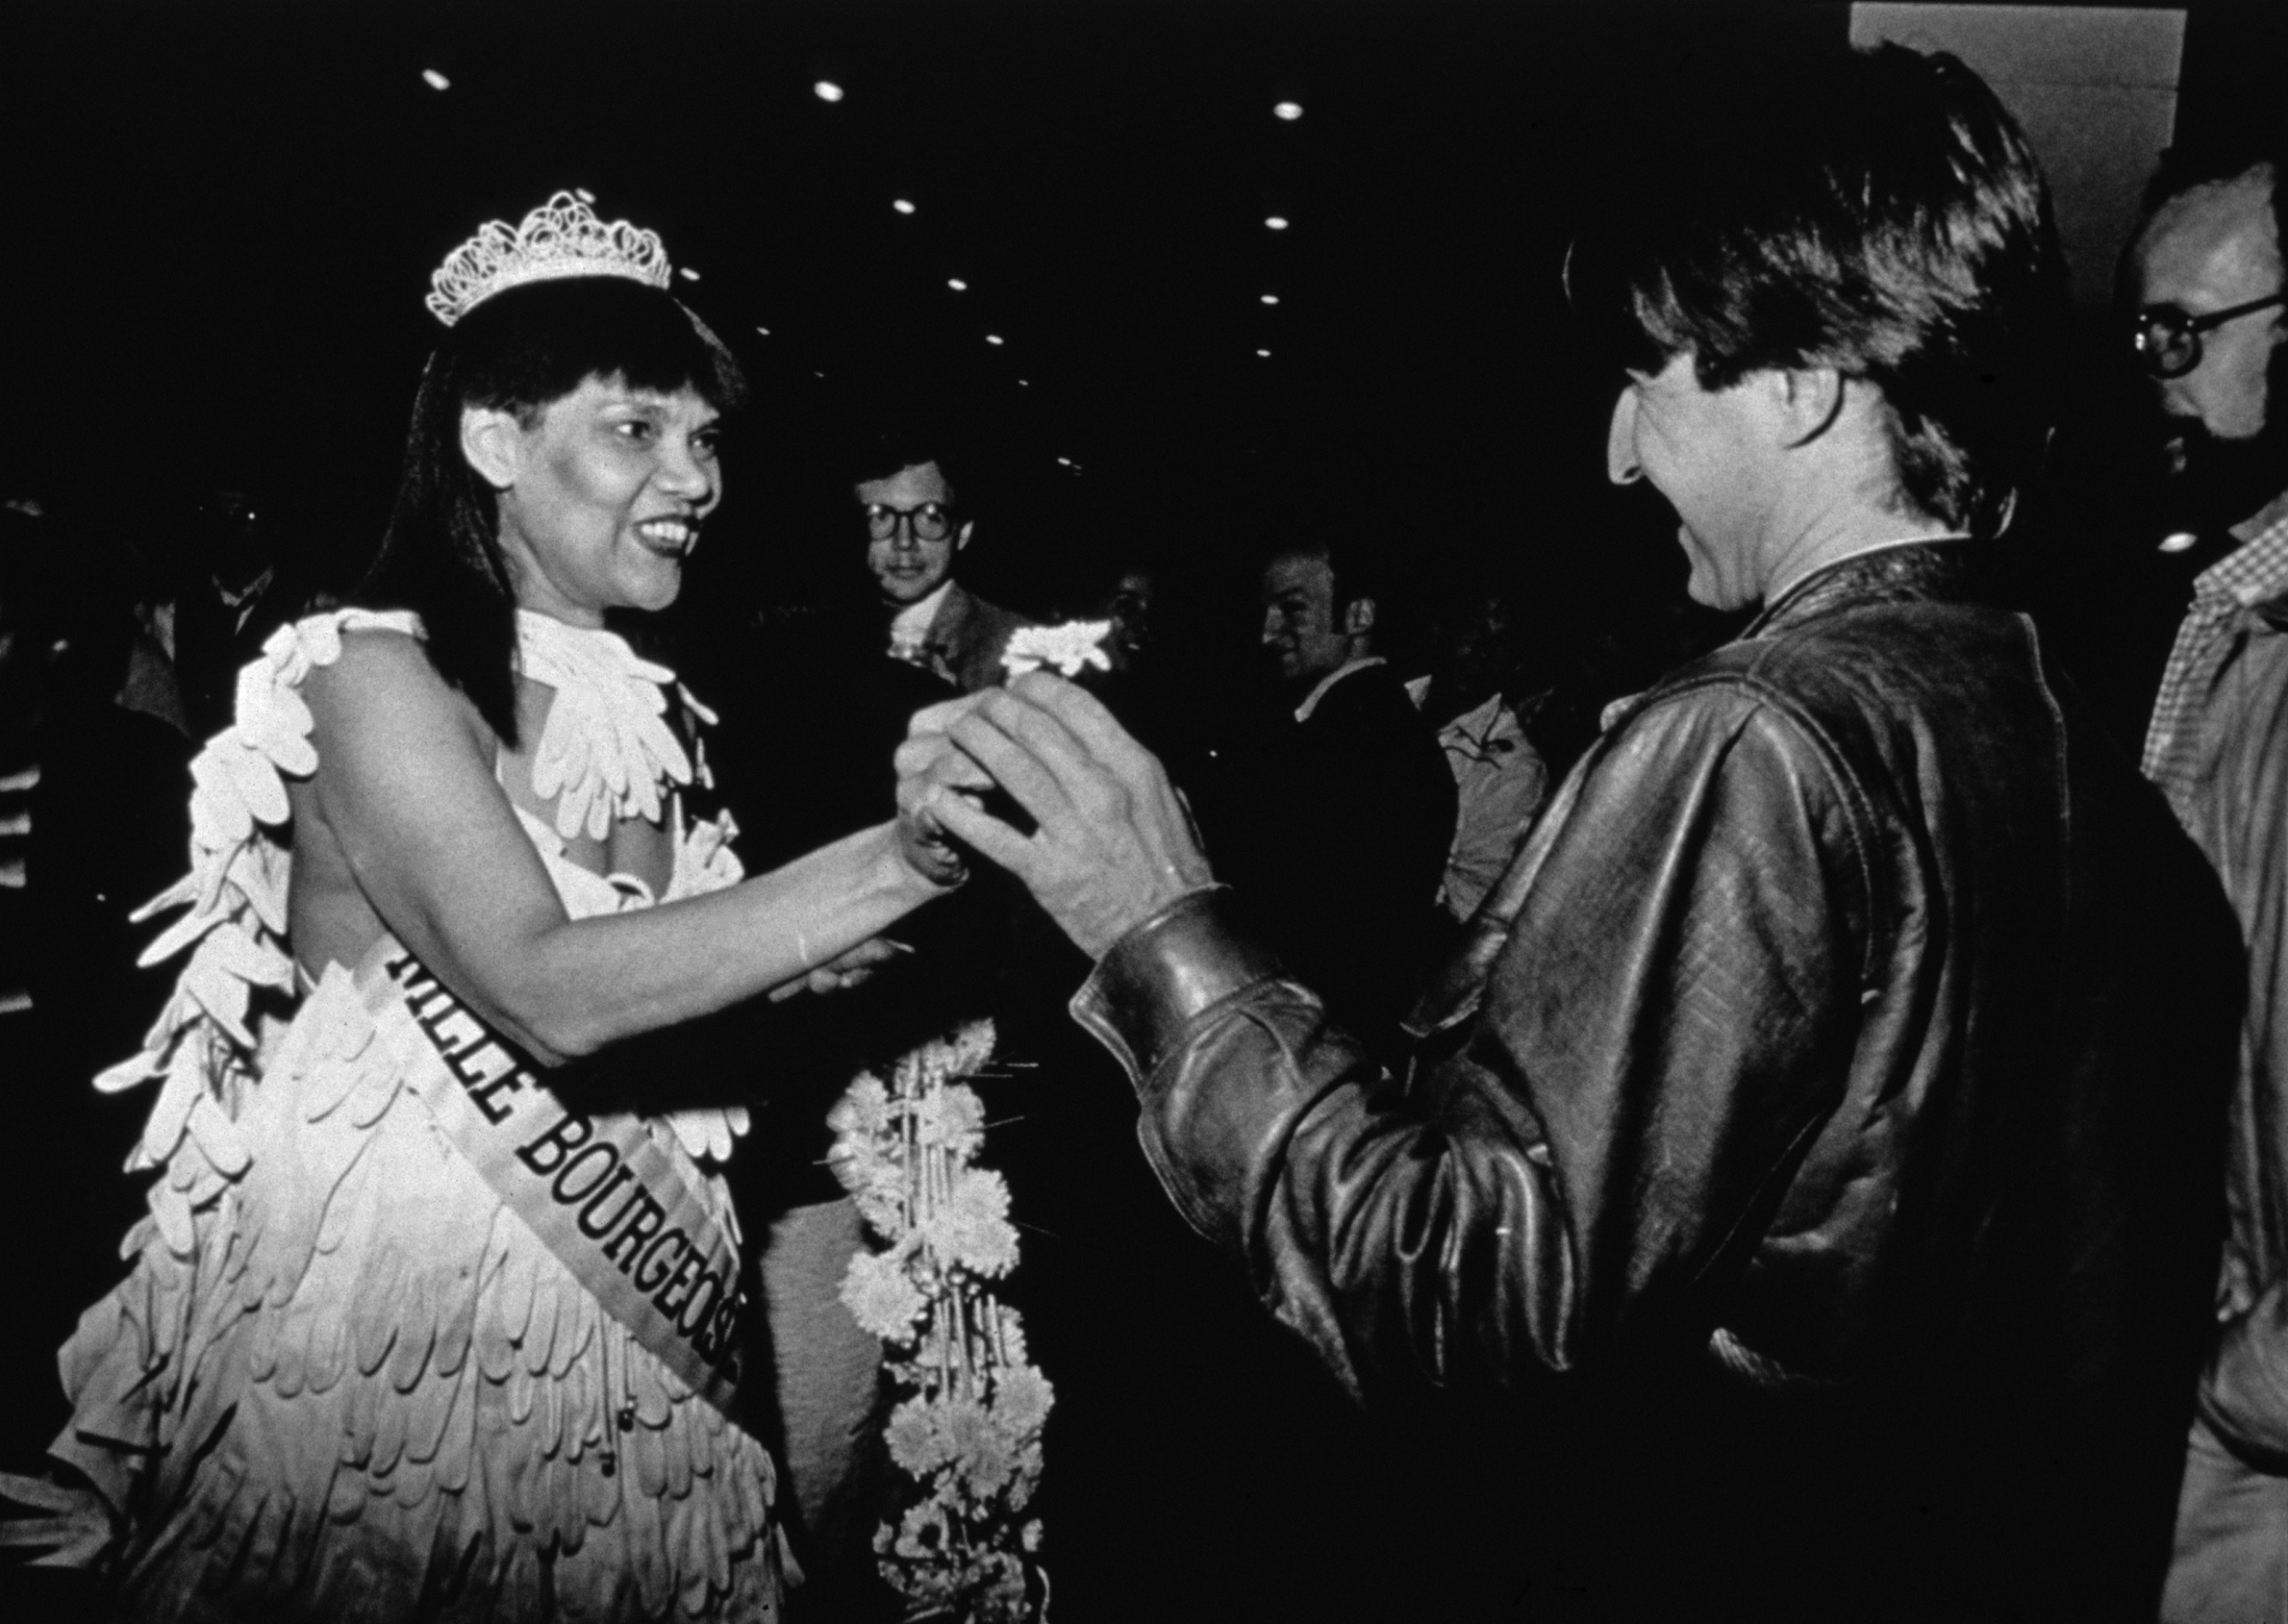 Black-and-white photograph of a Black woman in a tiara, with a pageant sash reading "MLLE BOURGEOSE," smiling and handing a flower to a white man in a leather jacket.